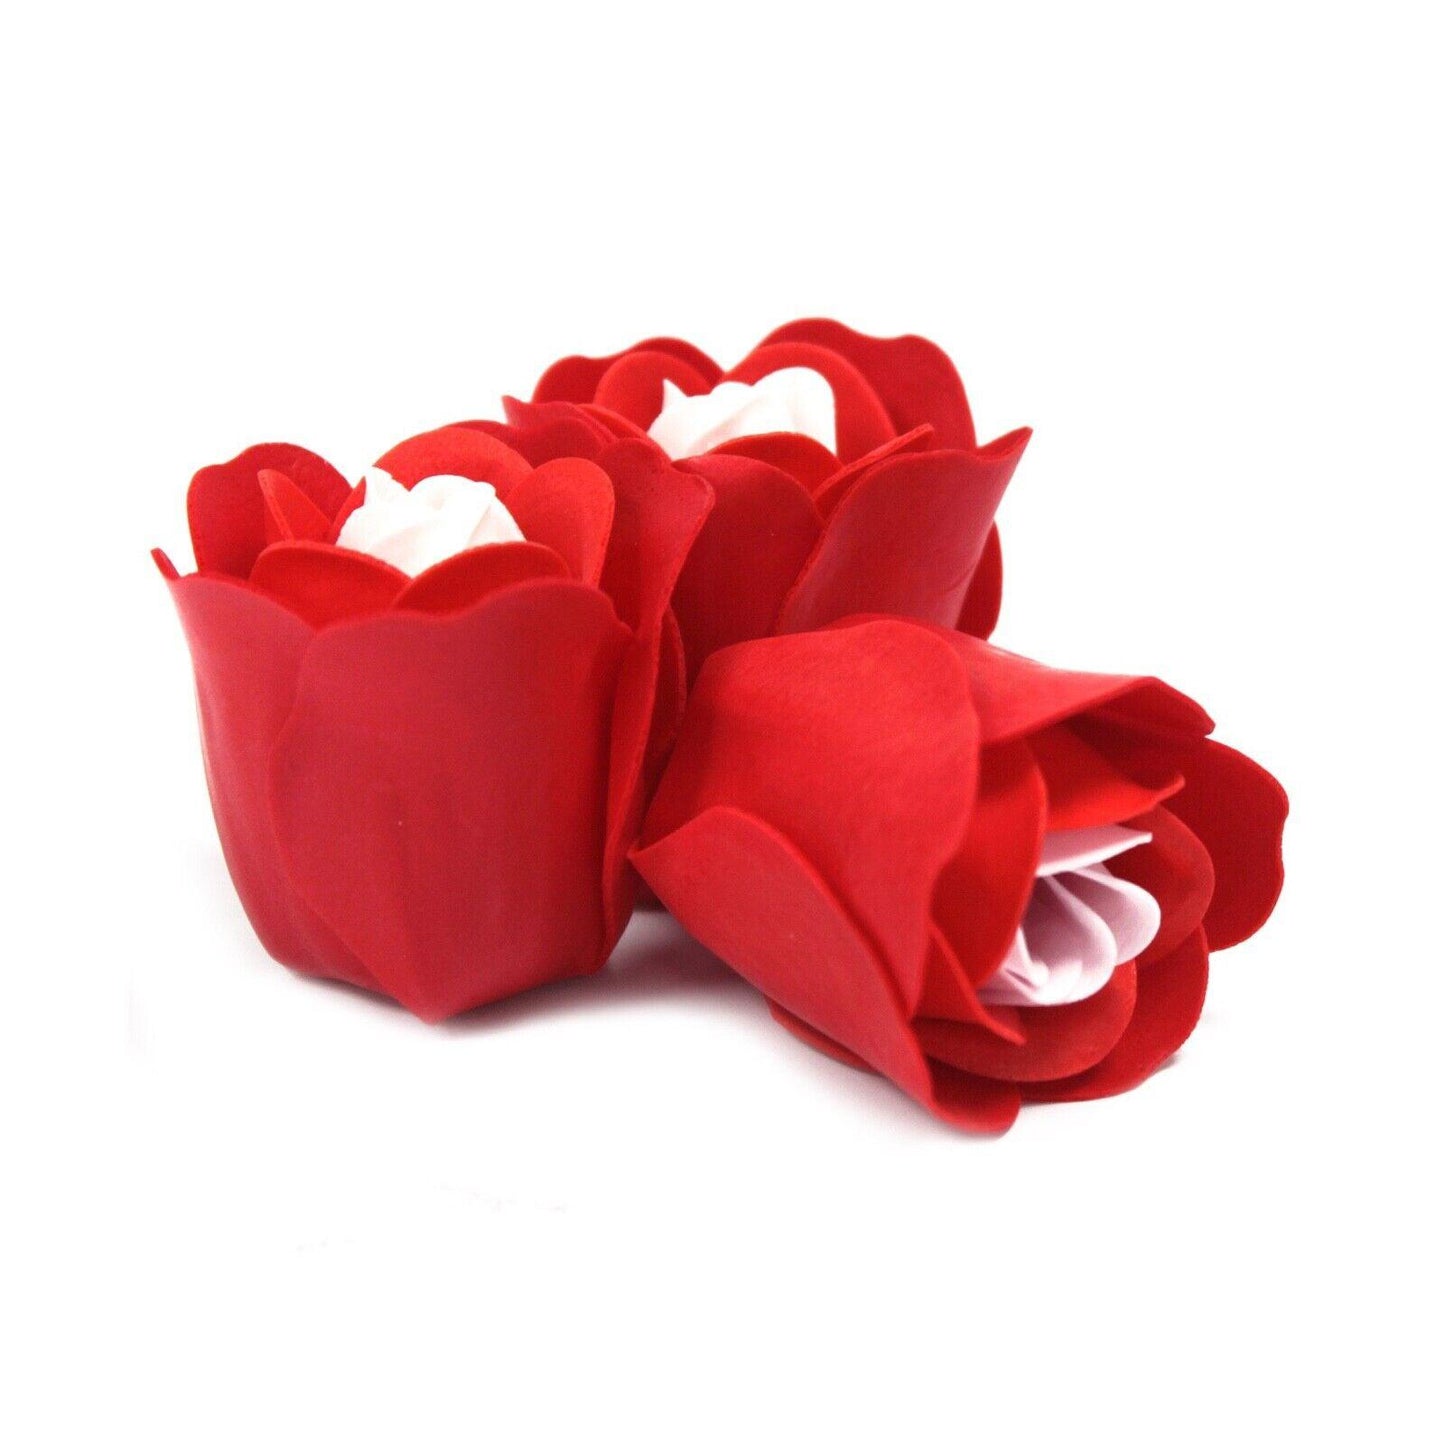 Buy Luxury Soap Flowers in Heart Box - Red Roses, Valentines Day Gifts - The perfect addition to a relaxing romantic bath with a beautiful aroma! They almost look like real flowers! Enjoy colourful water & great scent. A thoughtful & meaningful gift for your love on Valentine's Day, Mother's Day, Christmas, Anniversary, Birthday etc. It leaves your skin soft, silky & smelling wonderfully fresh. These Bath Flowers are a stunning gift, sure to delight. at Sacred Remedy Online